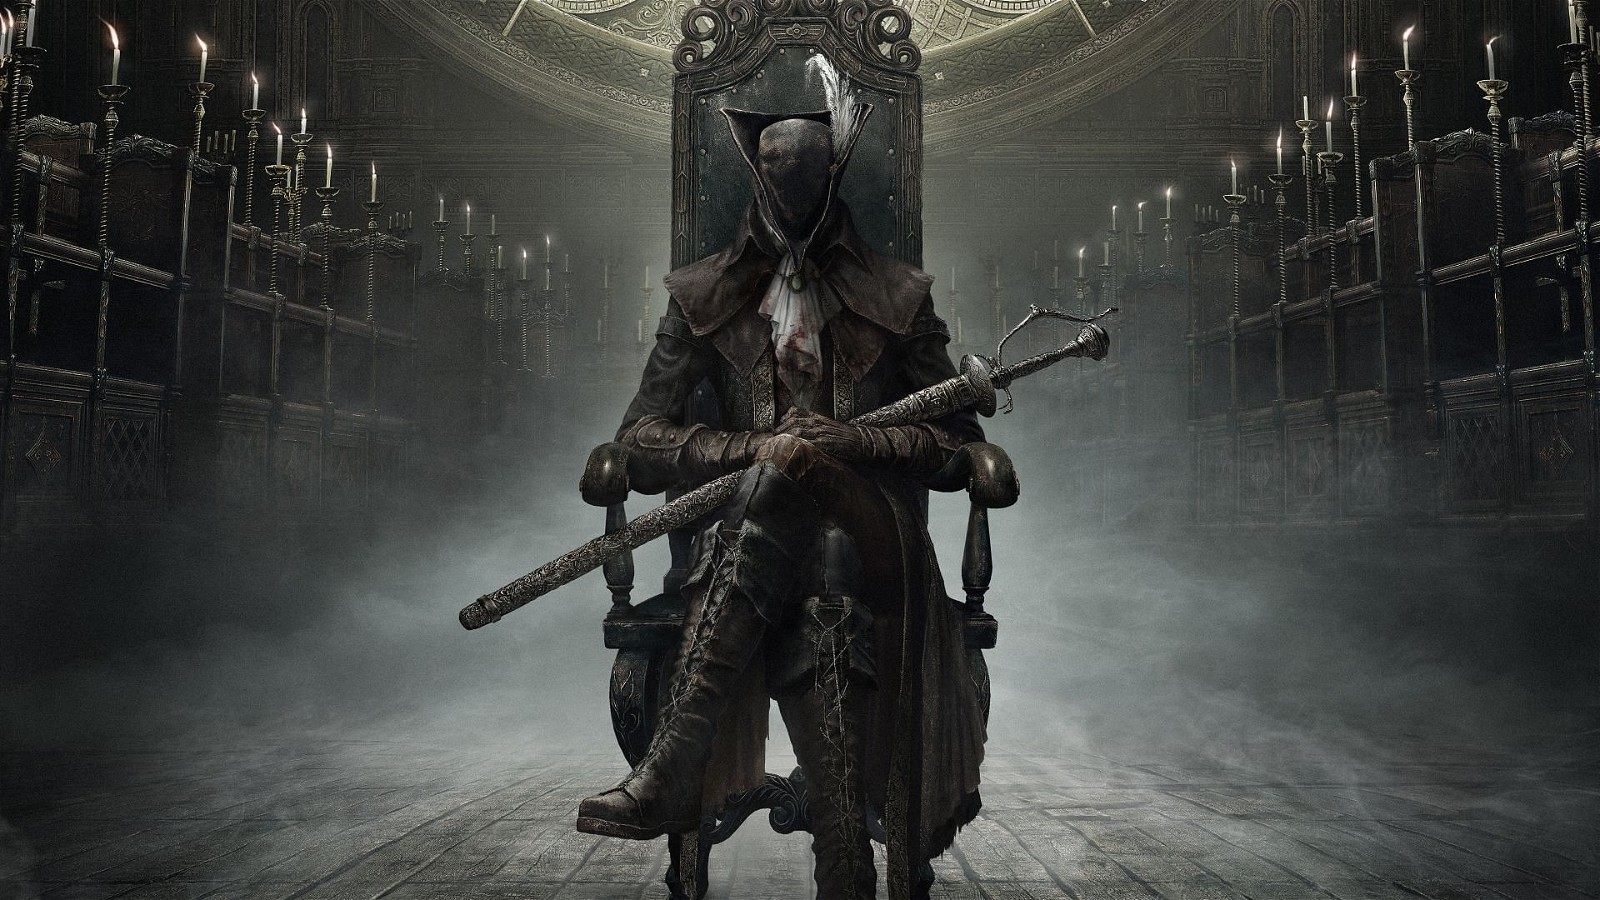 Fans will get to see a Bloodborne live-action movie soon